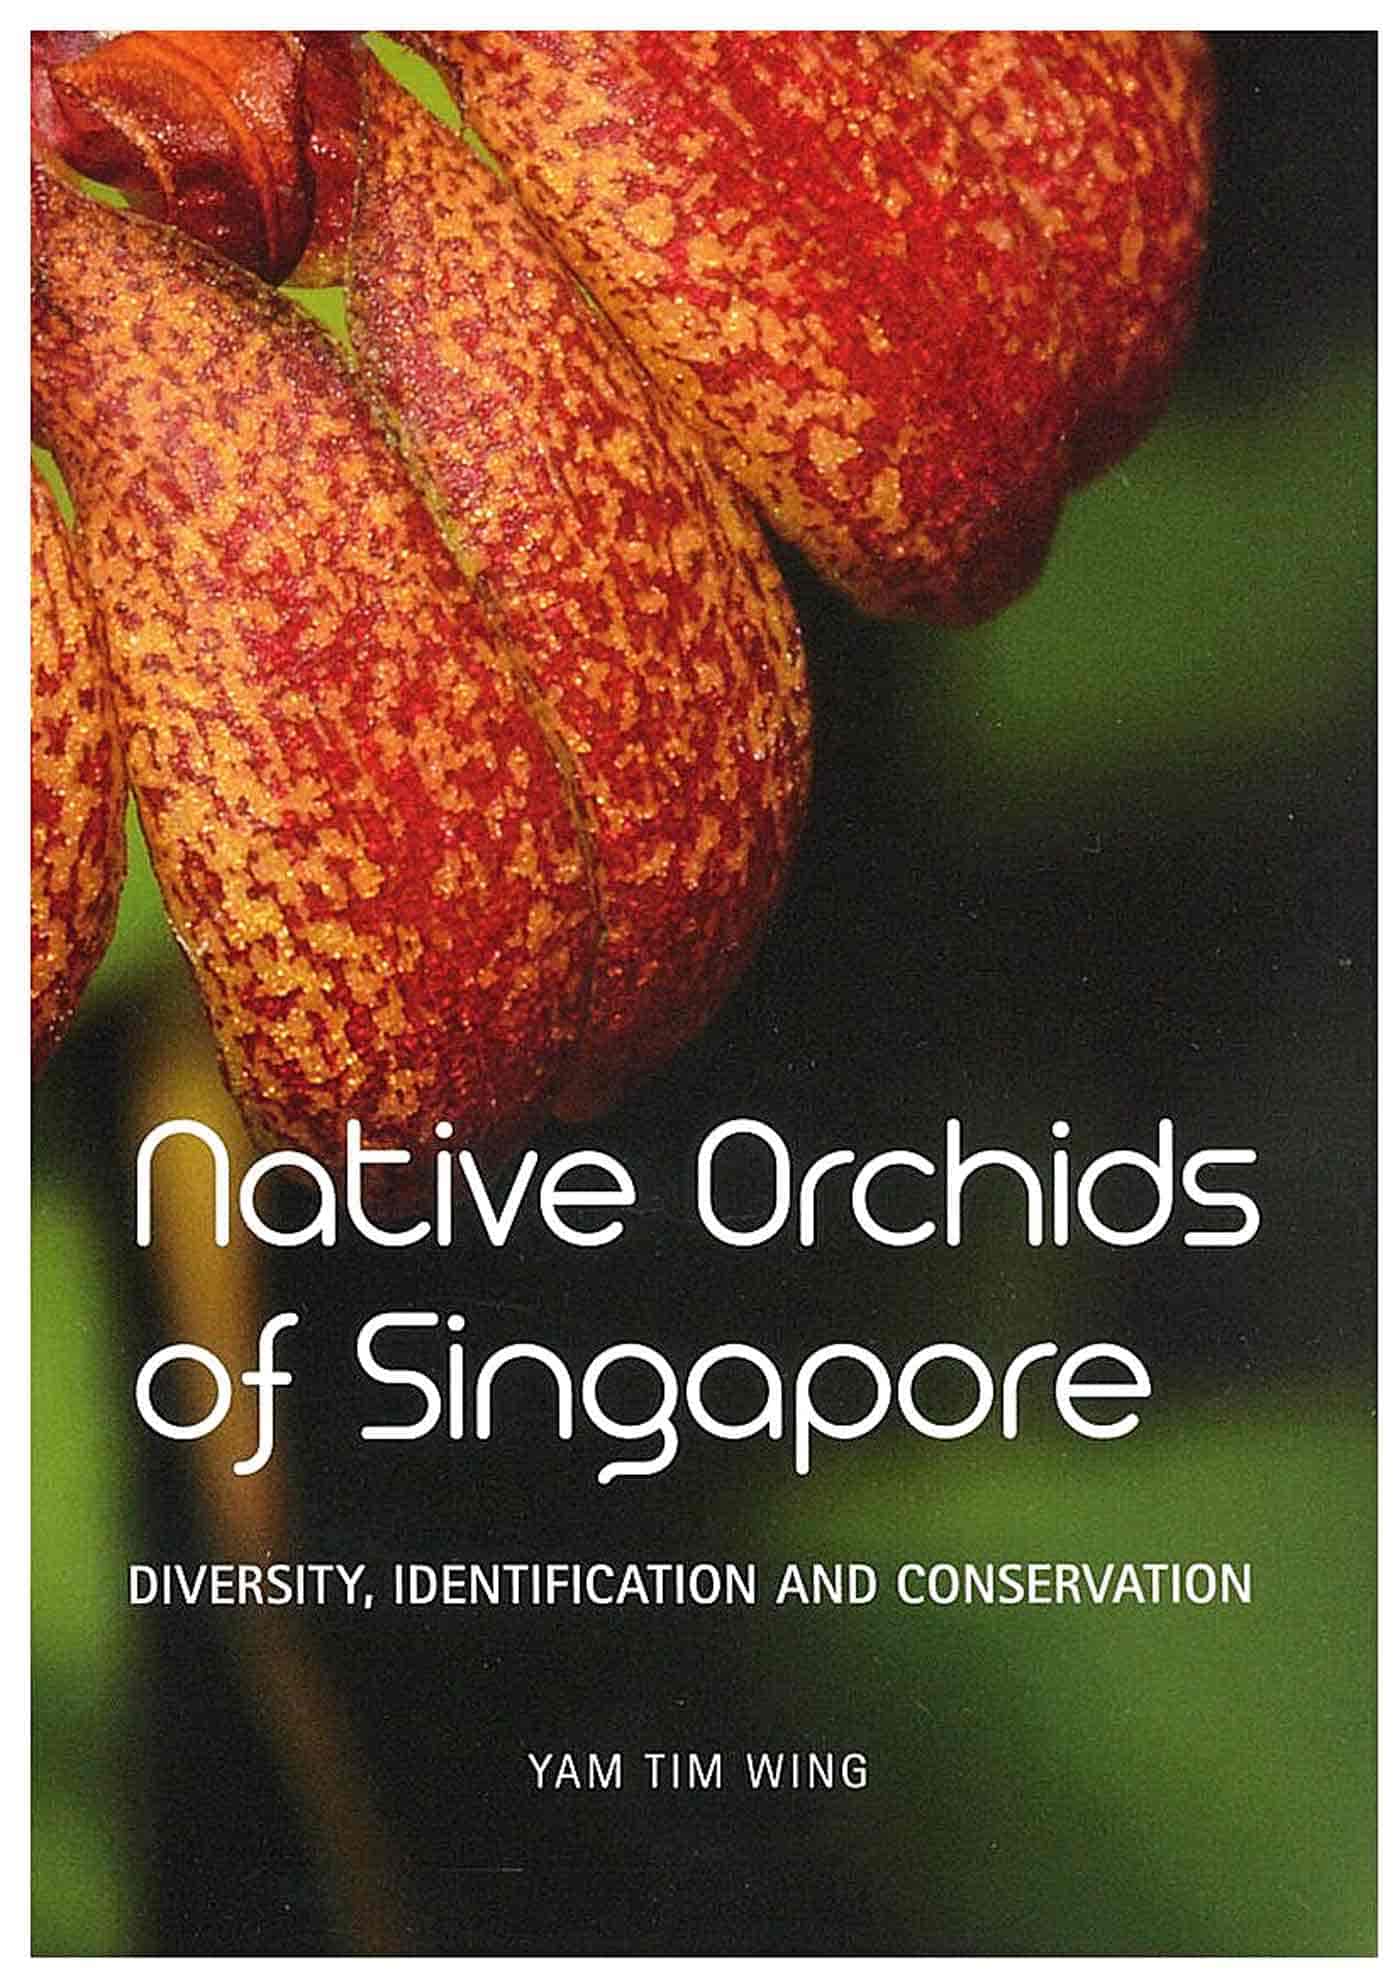 Native Orchids of Singapore – Diversity, Identification and Conservation